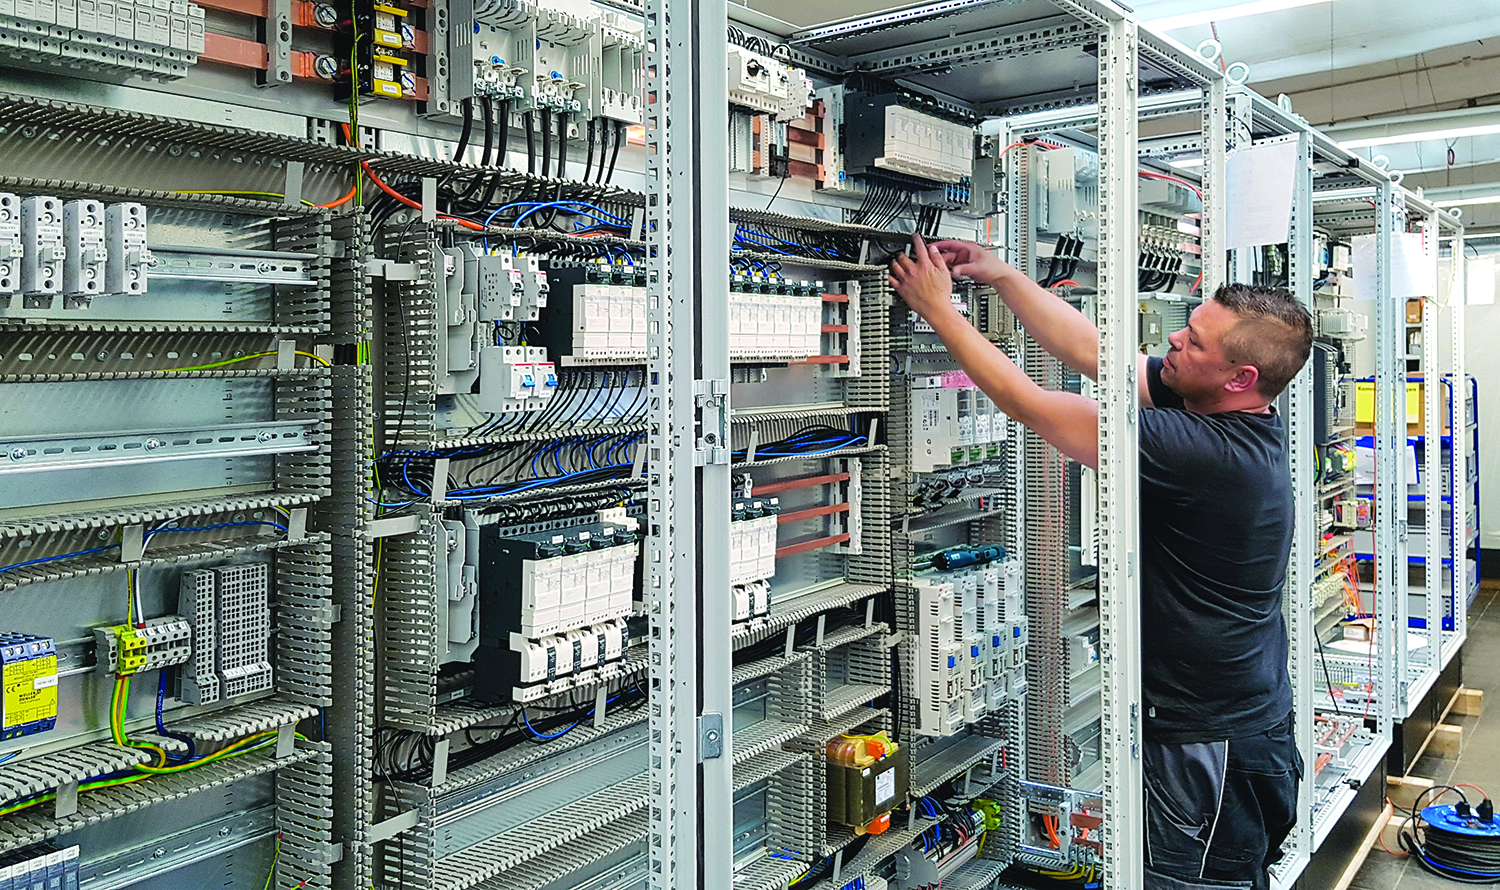 The often multiple-field switch cabinets are constructed in-house at BSG, wired, tested and shipped worldwide. [Source: WSCAD GmbH]